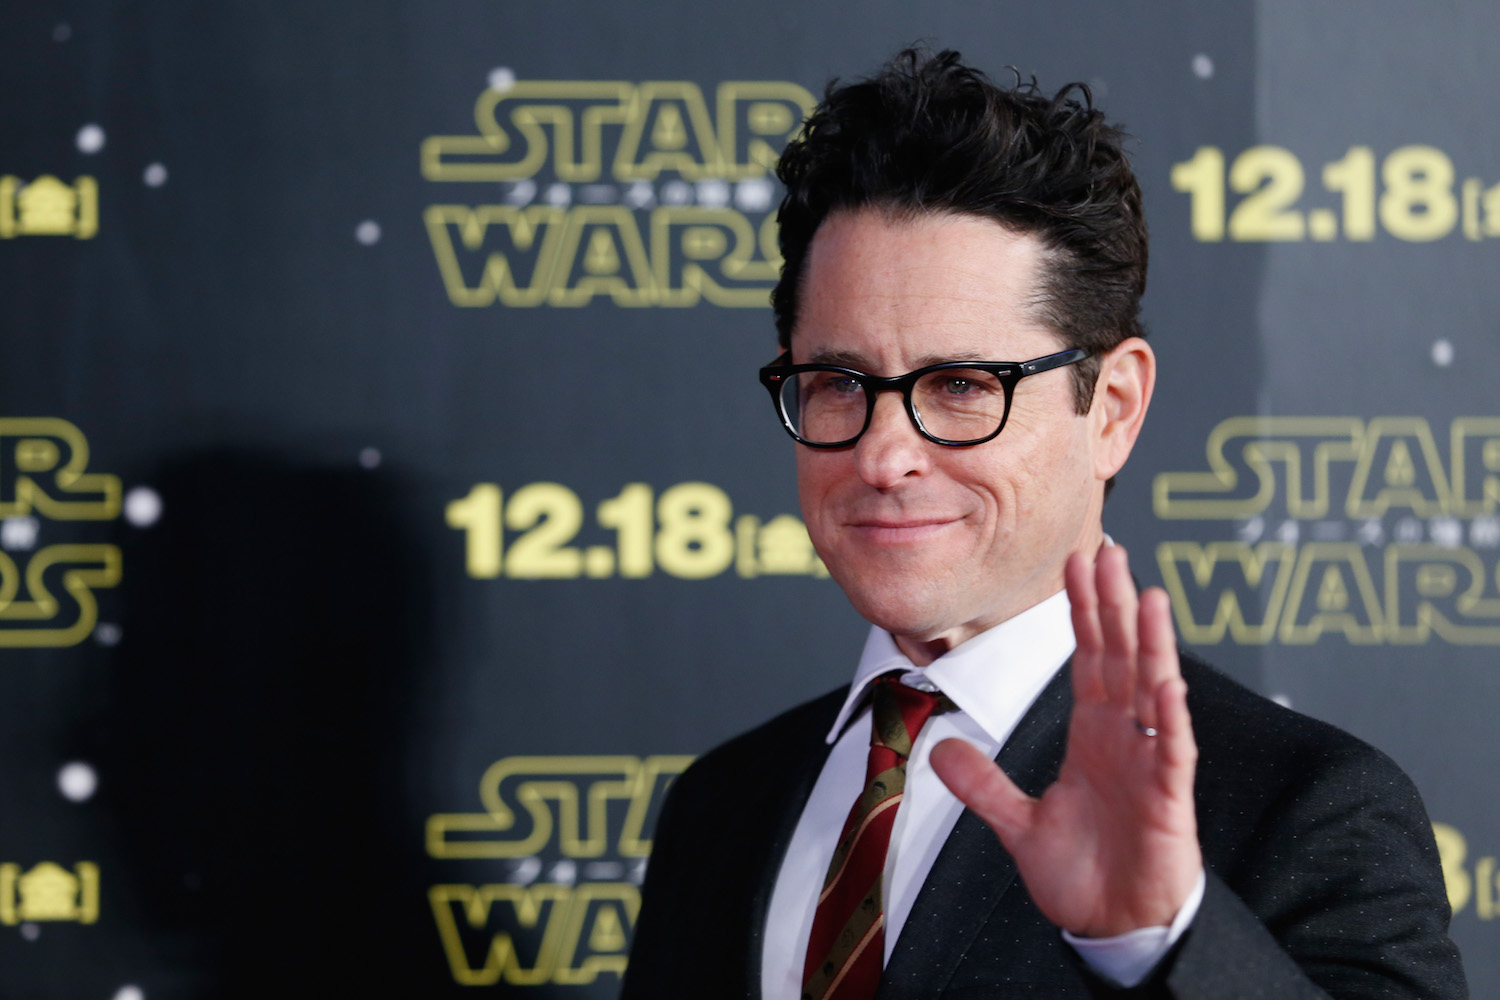 TOKYO, JAPAN - DECEMBER 10: Director J.J. Abrams attends the 'Star Wars: The Force Awakens' fan event at the Roppongi Hills on December 10, 2015 in Tokyo, Japan. (Photo by Christopher Jue/Getty Images for Walt Disney Studios)